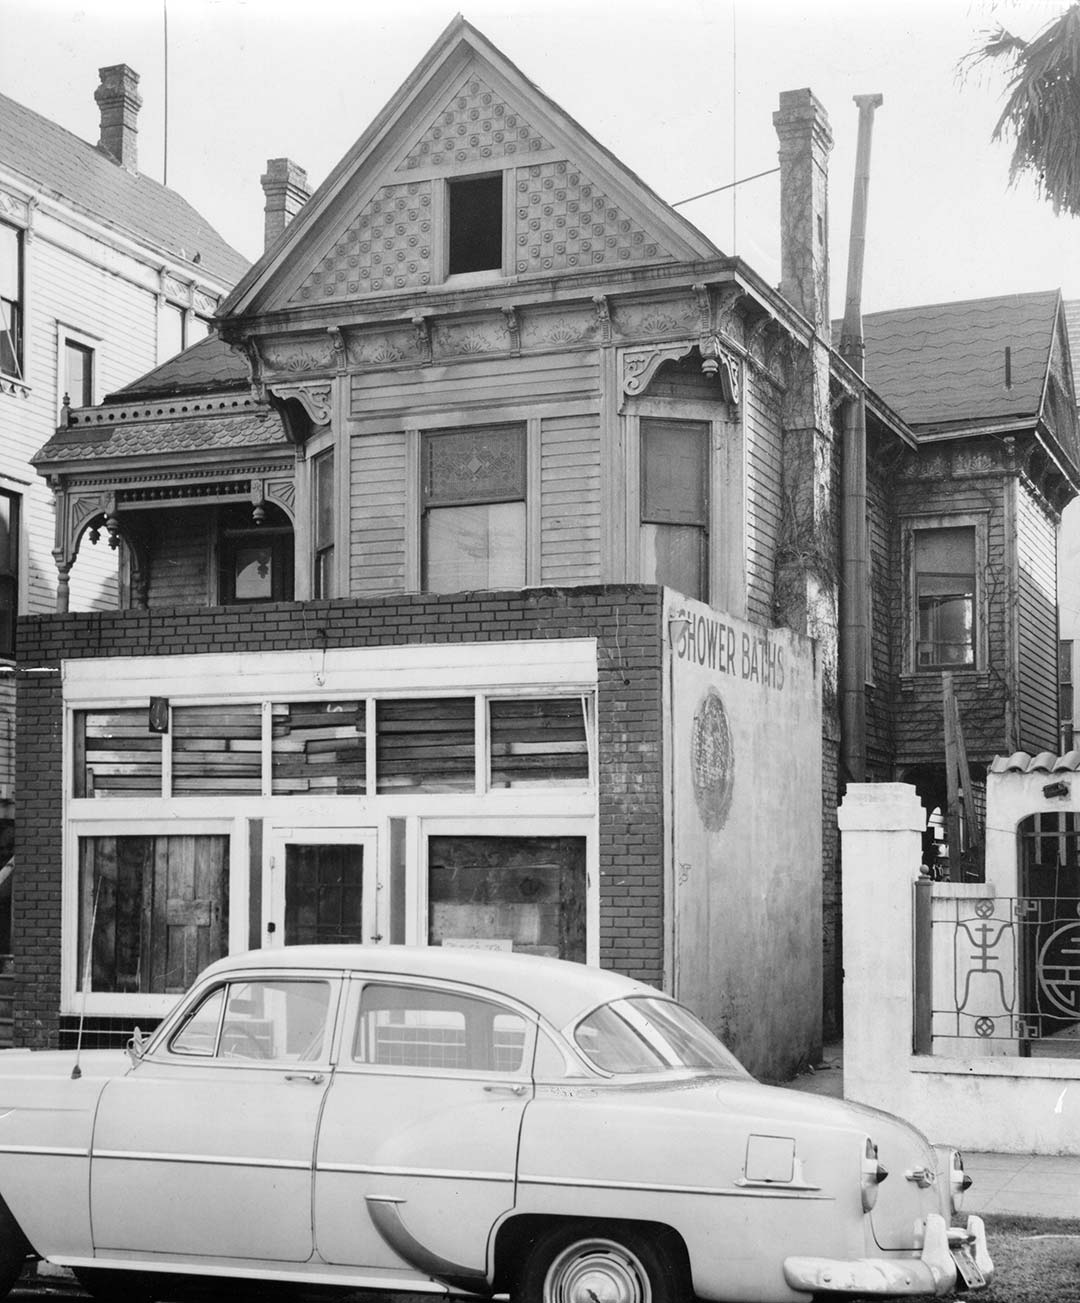 Black and white photo of a three story house. The house has a peaked roof, bay window in the front on the second floor and a closeed-in porch on the ground floor. A sedan is parked on the street in front. The windows are boarded up.